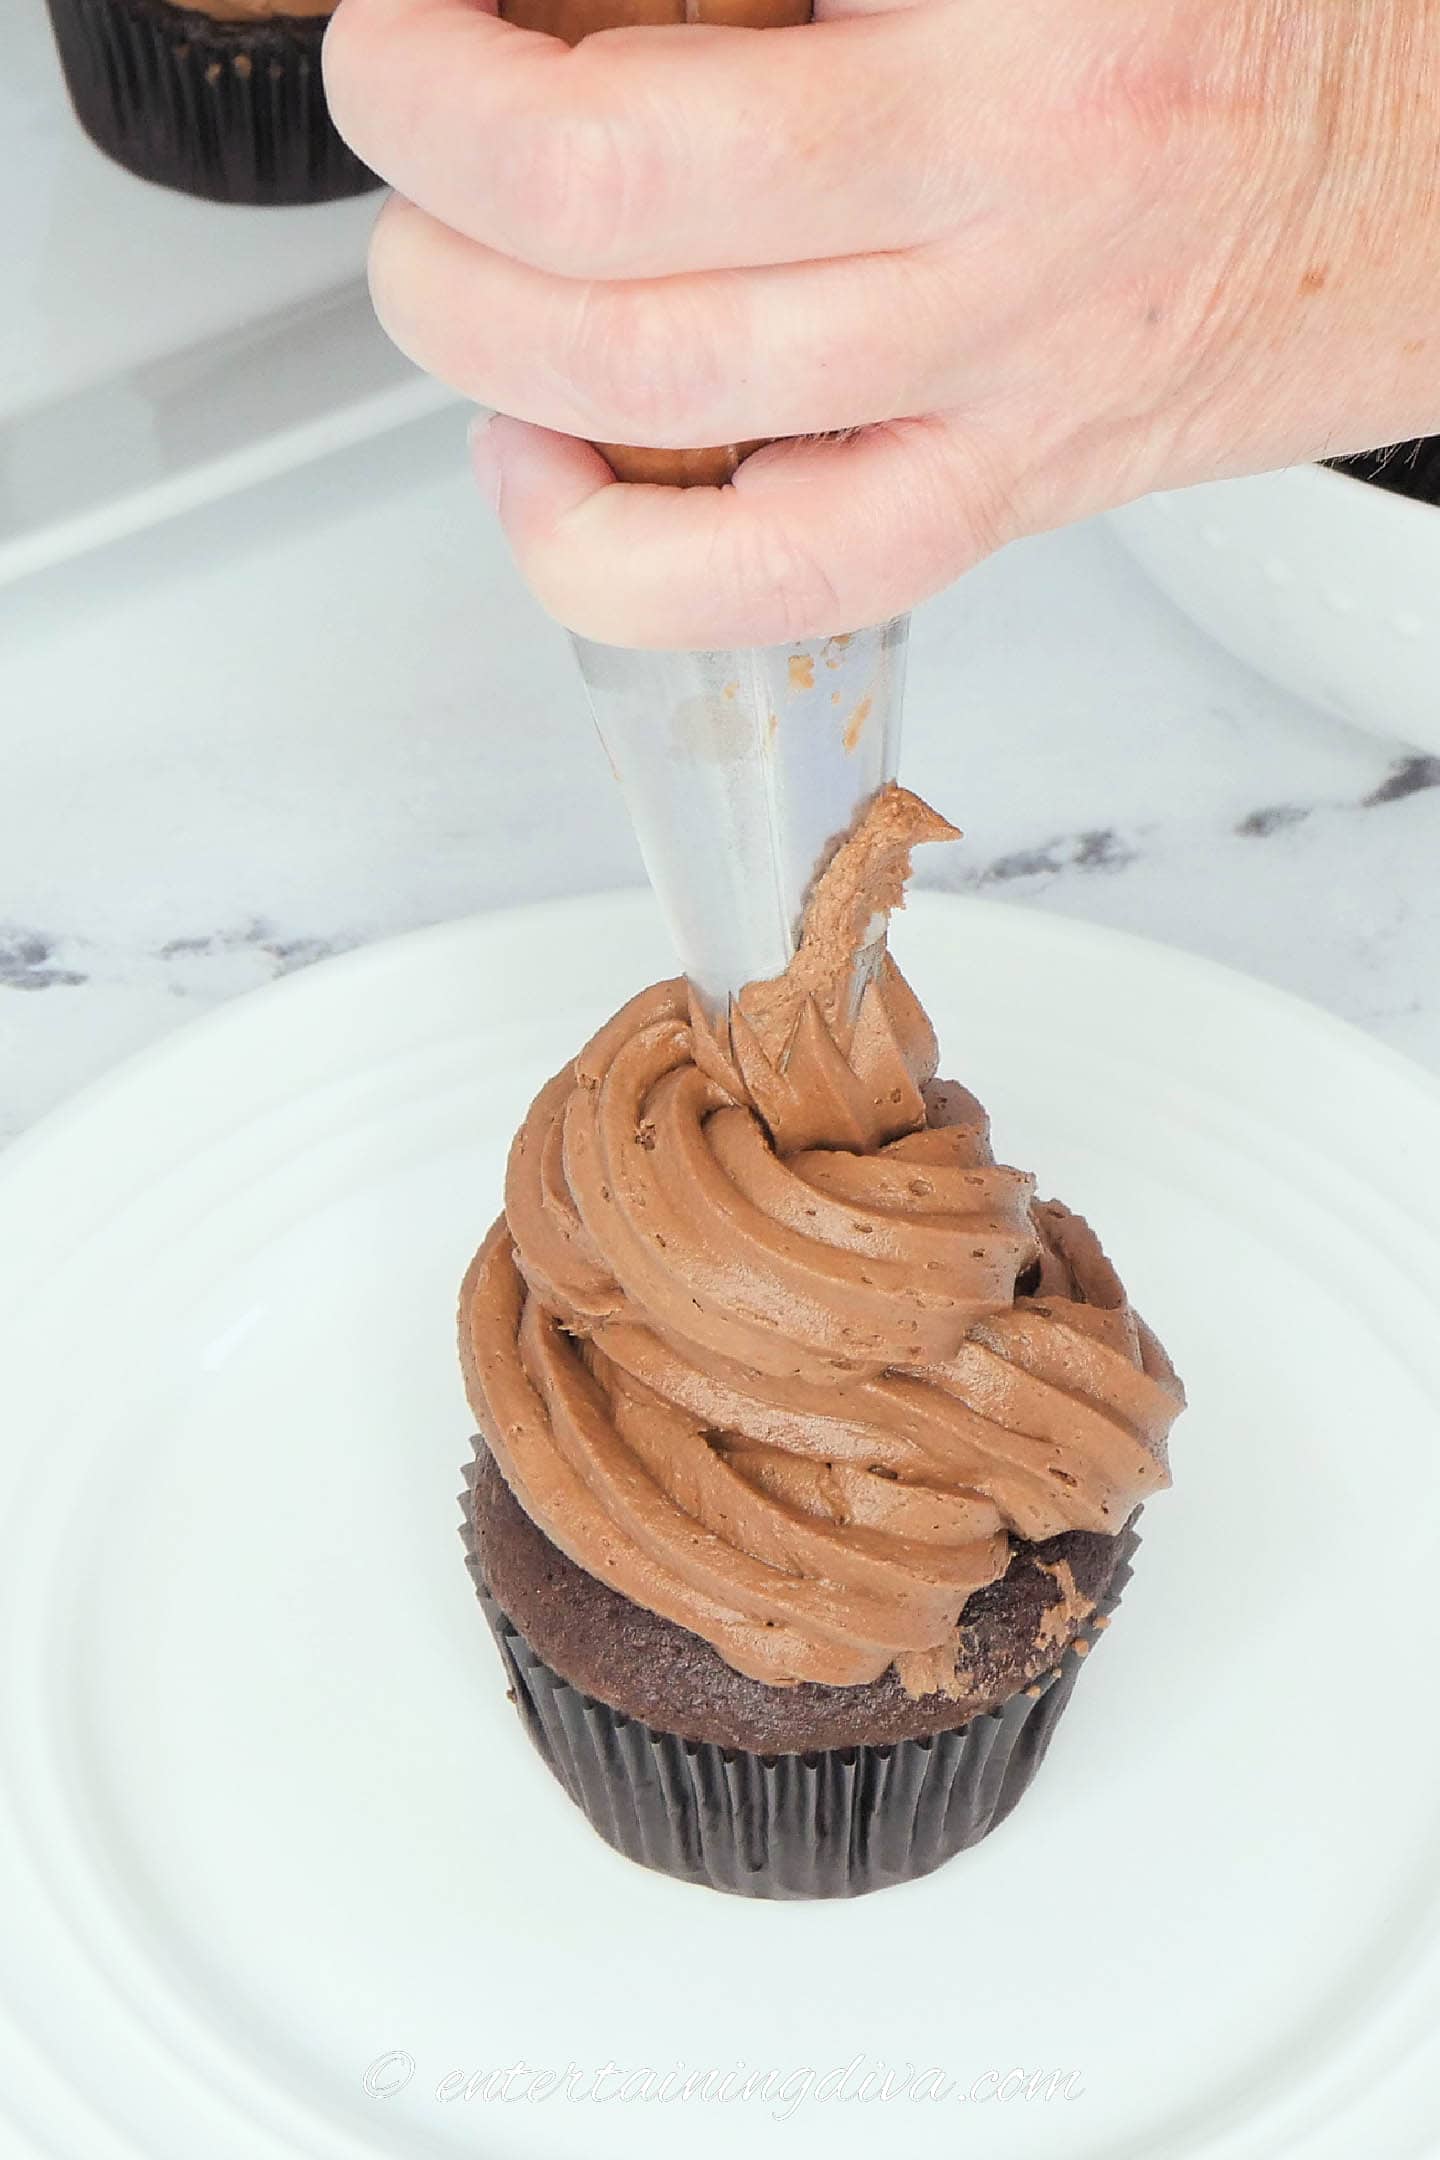 chocolate buttercream frosting being piped onto a chocolate cupcake